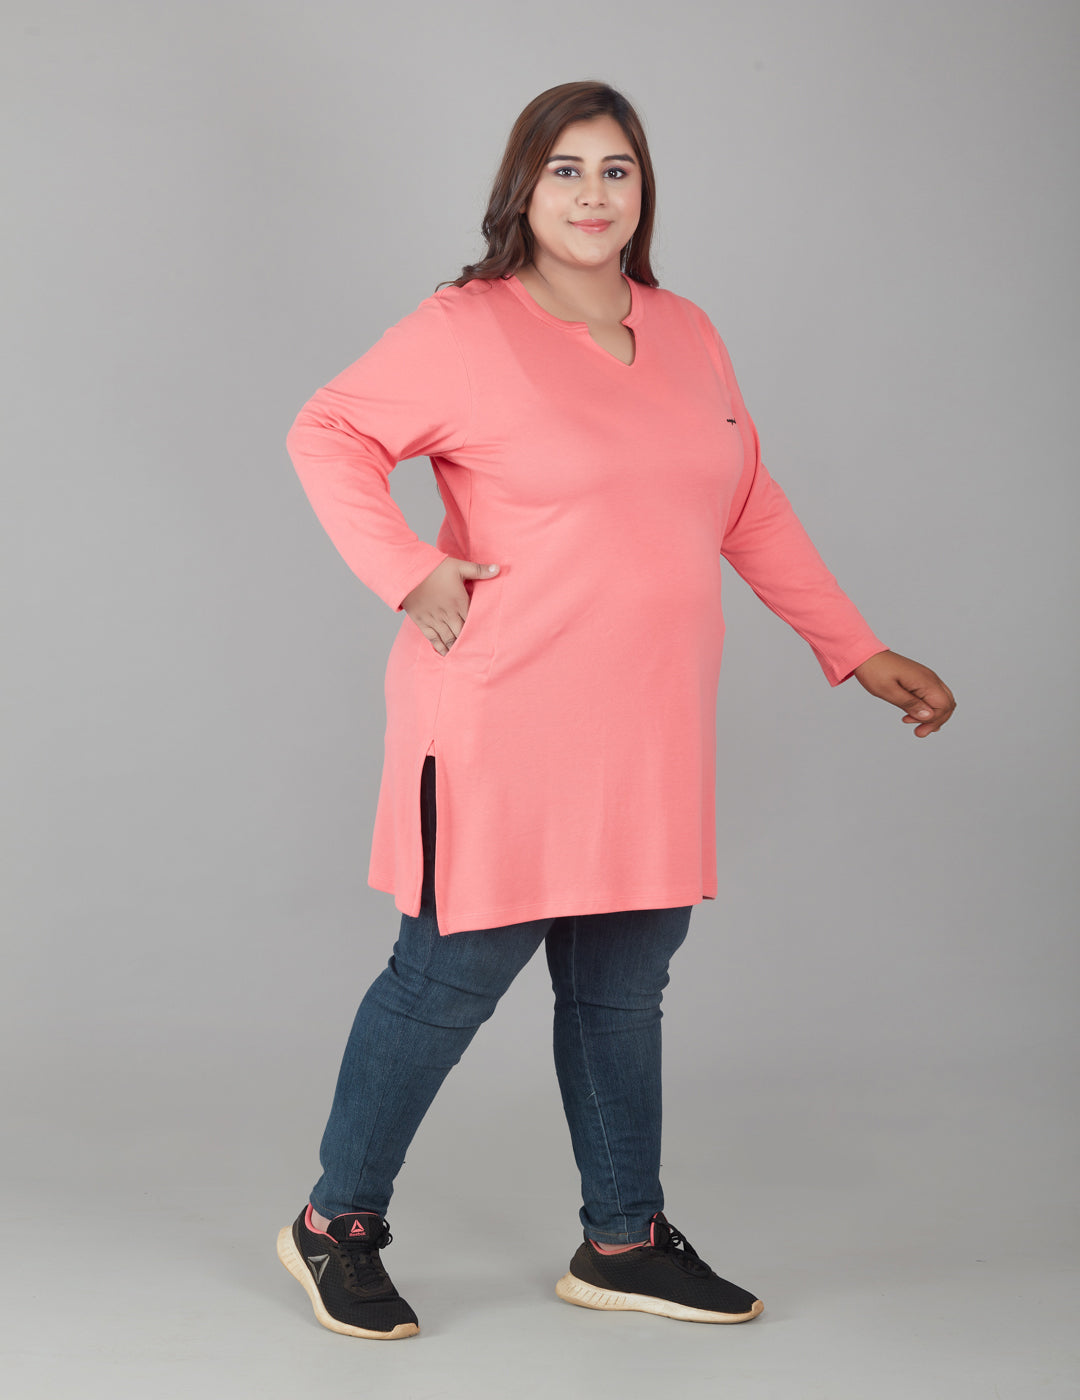 Stylist Full Sleeves Long Tops For Women In Plus Size - Pink